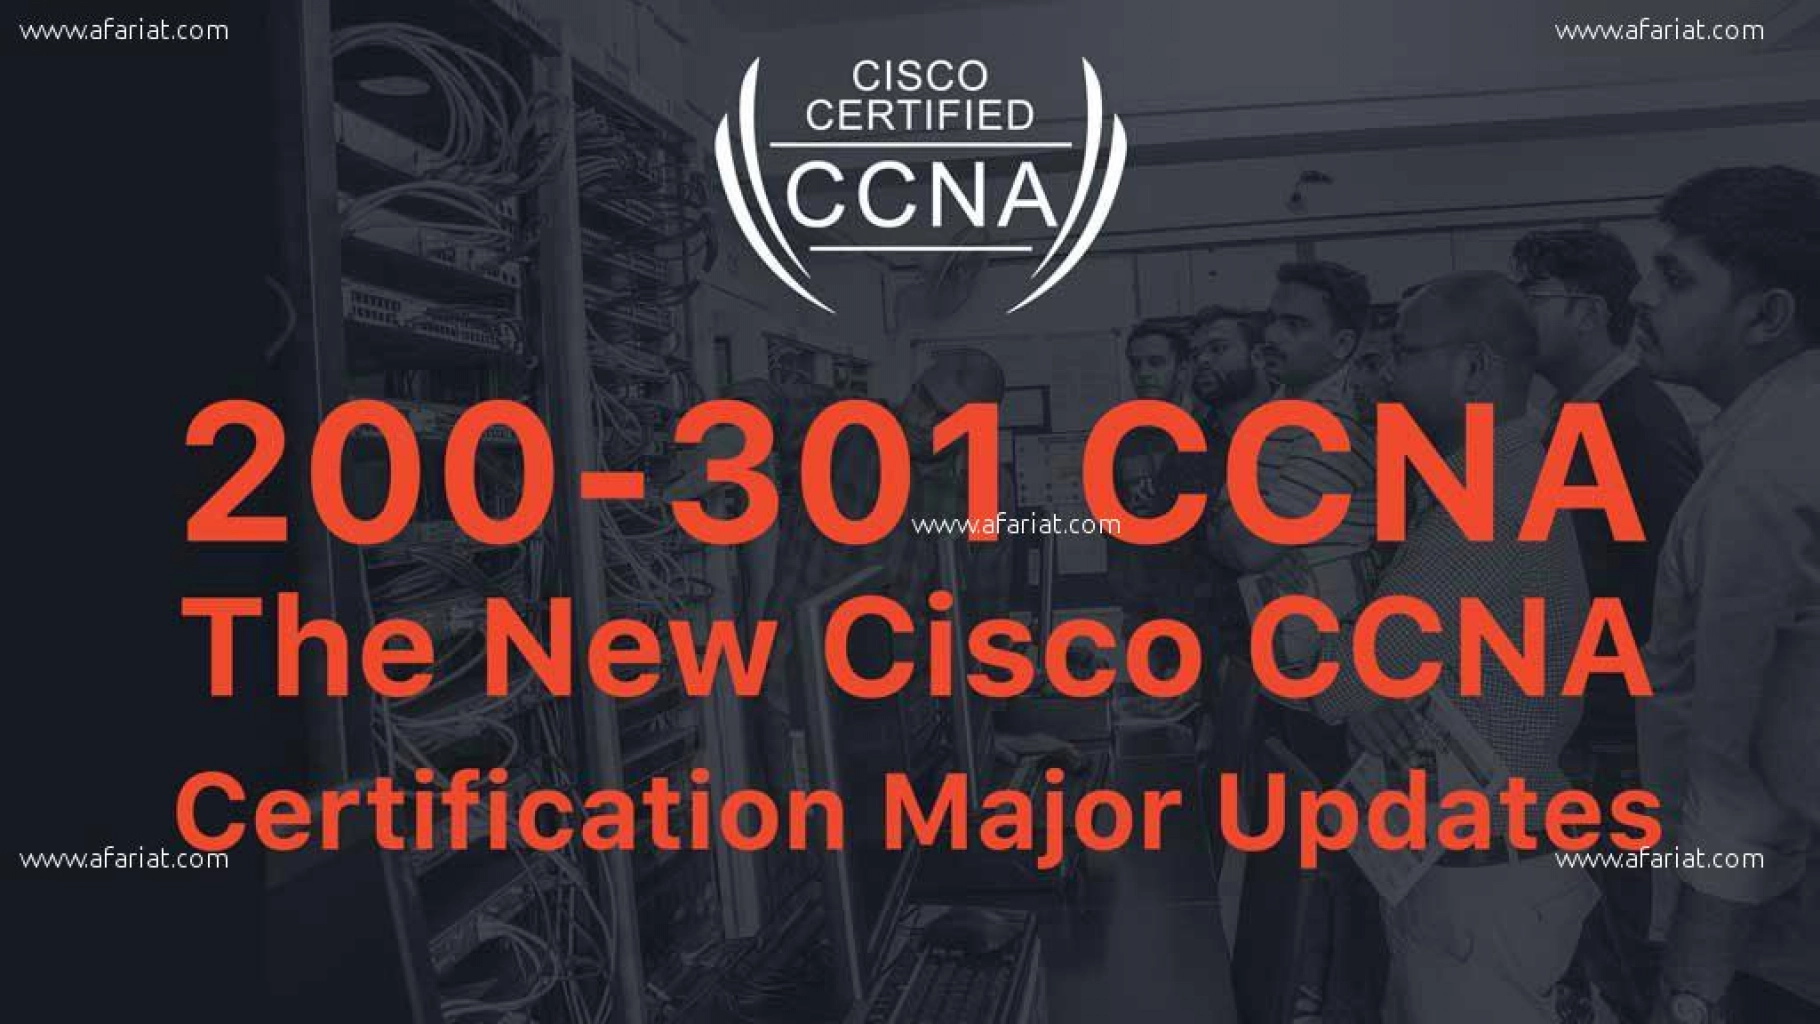 Certification Cisco CCNA Routing et Switching